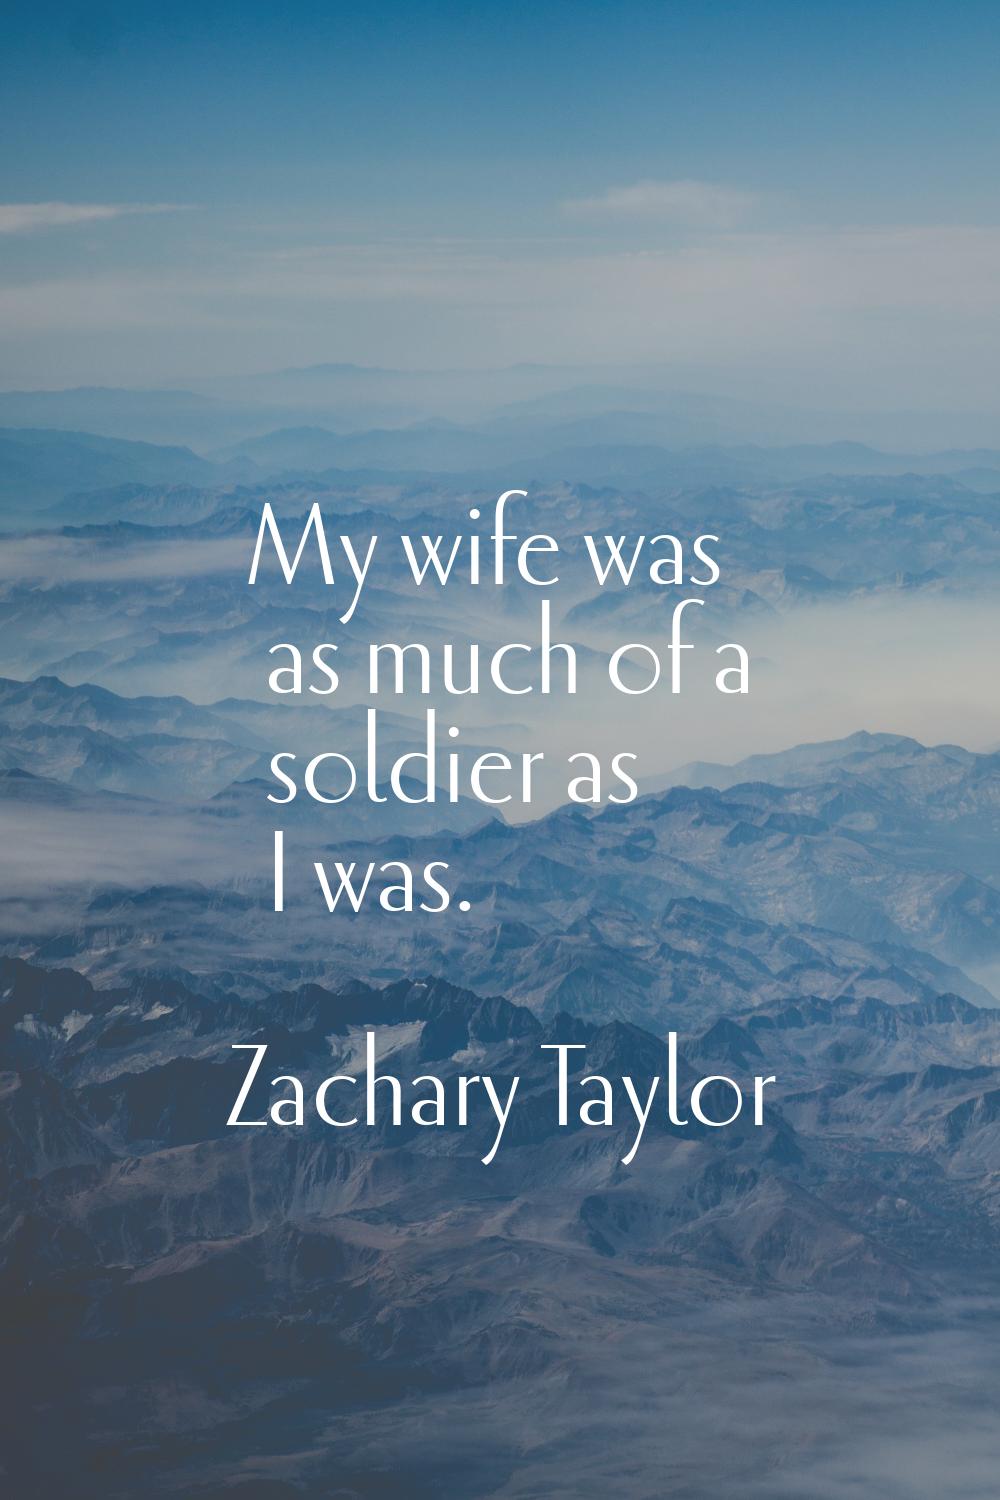 My wife was as much of a soldier as I was.